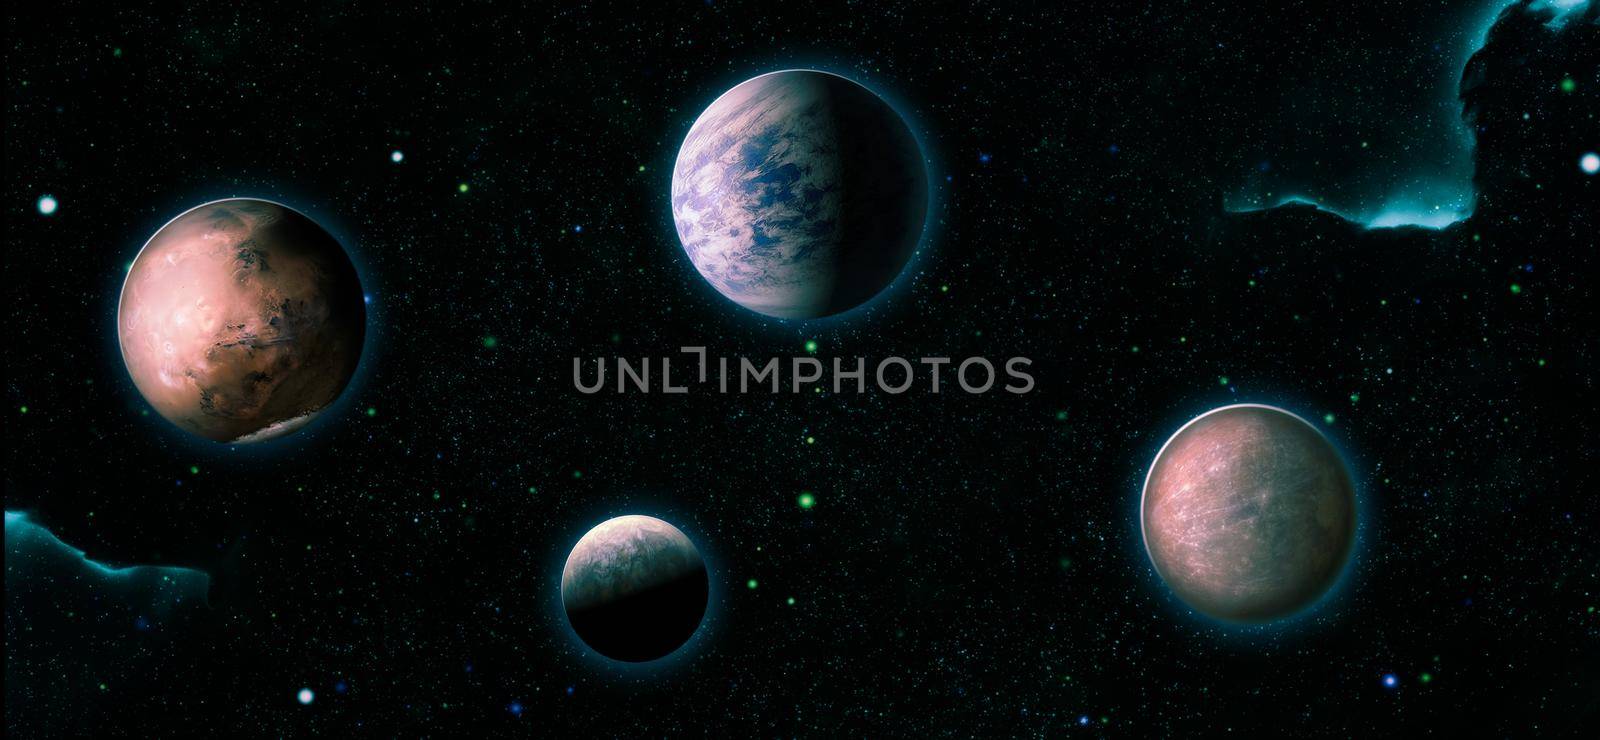 planets, stars and galaxies in outer space showing the beauty of space exploration. Elements furnished by NASA